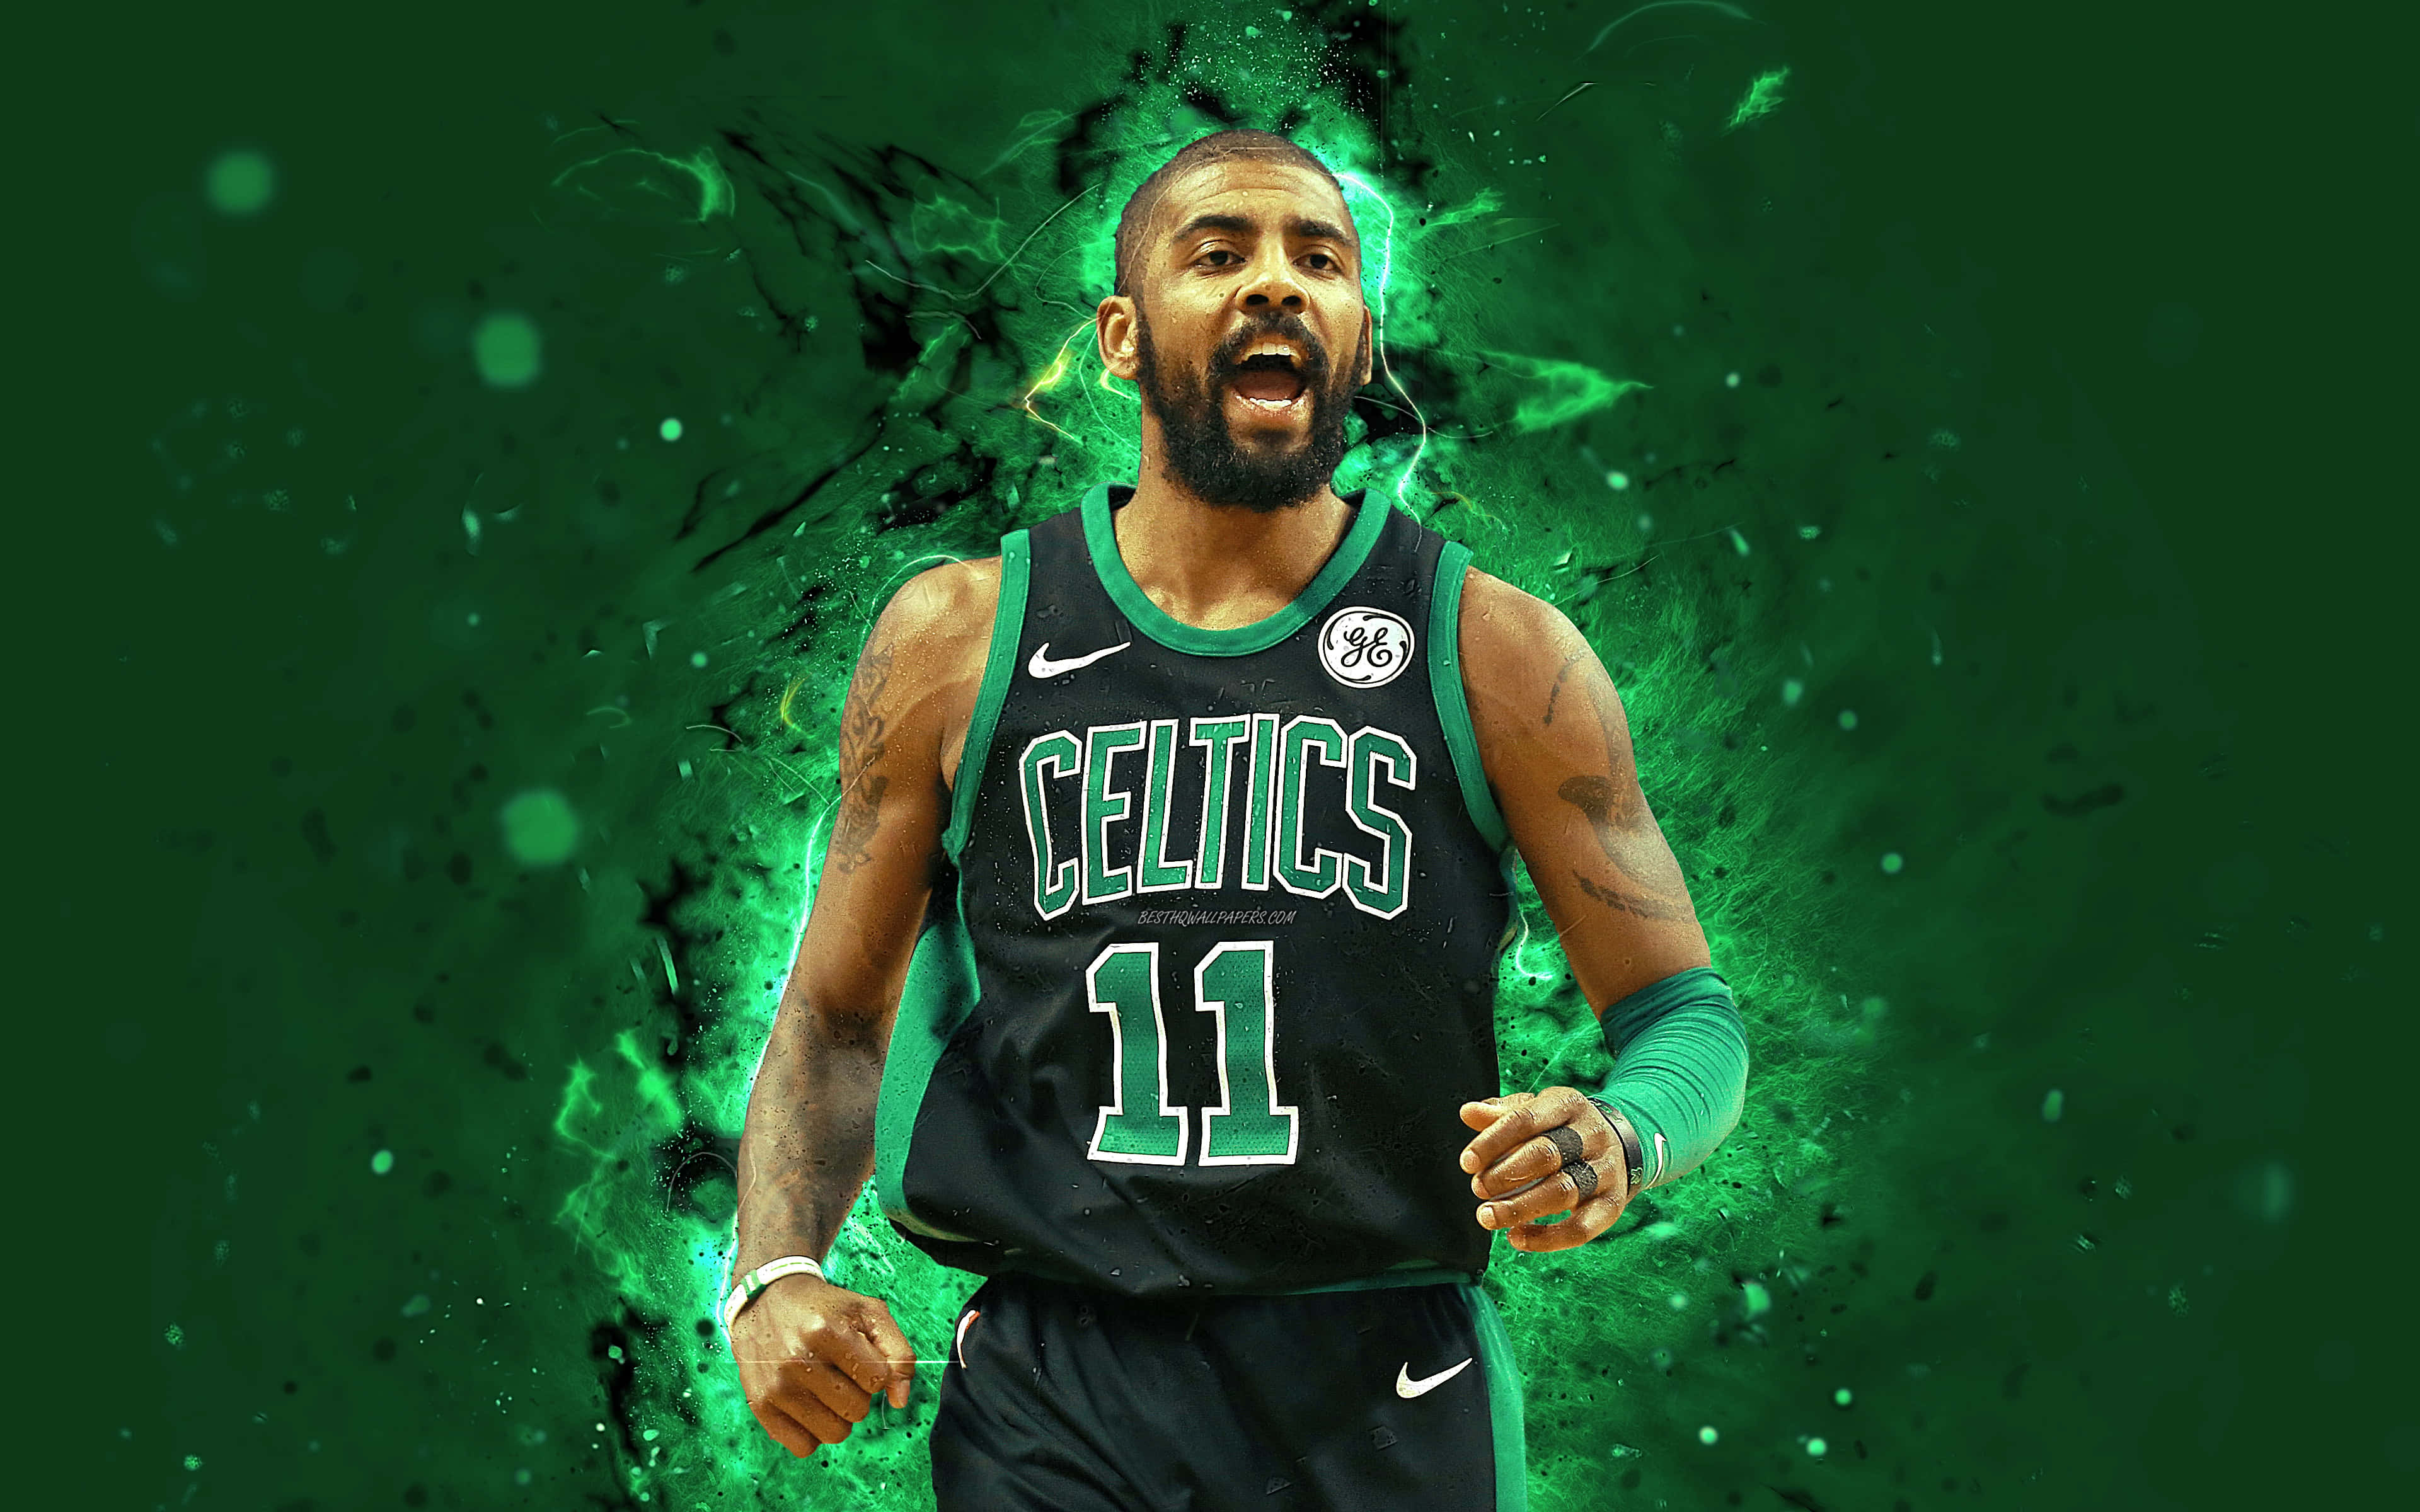 Kyrie Irving showing off his cool side in the latest basketball game Wallpaper